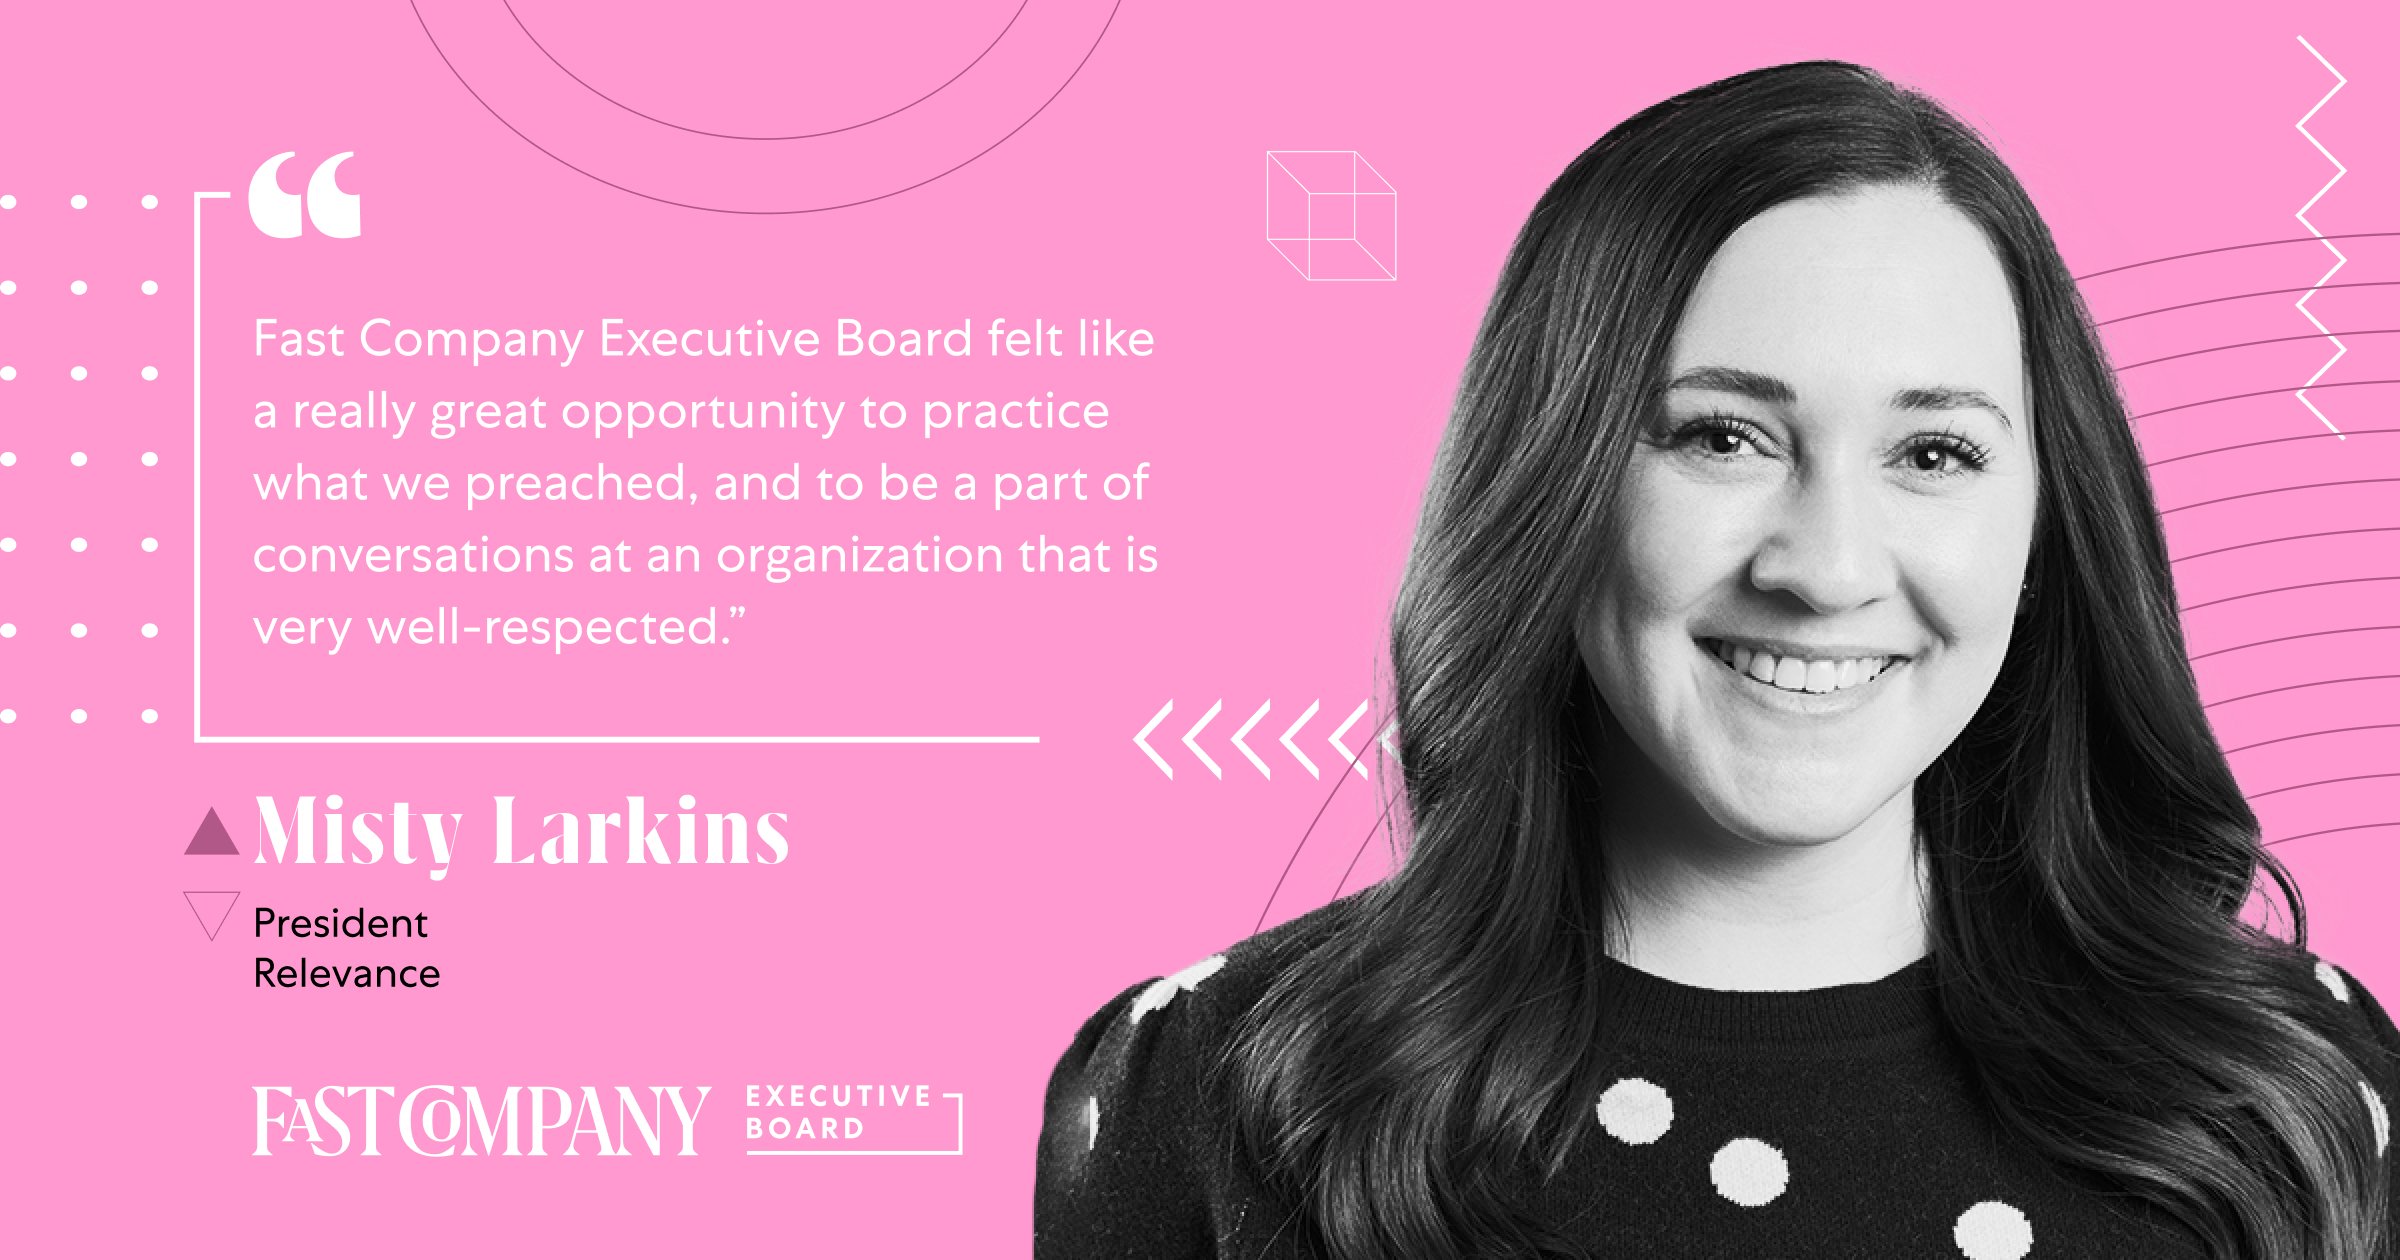 Fast Company Executive Board Publishing Gives Misty Larkins Increased Authority With Clients